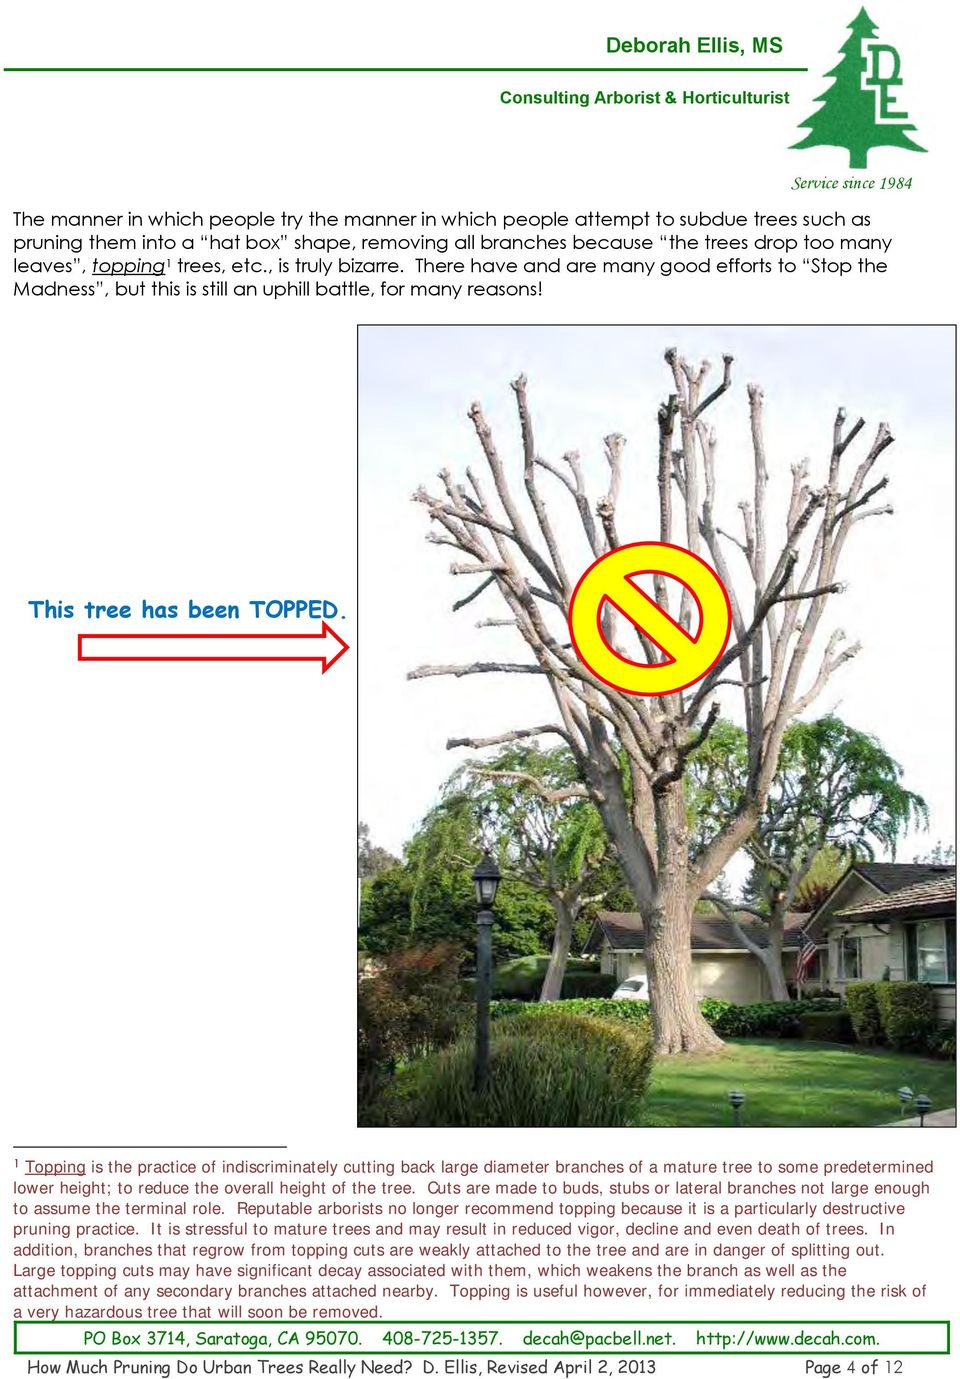 1 Topping is the practice of indiscriminately cutting back large diameter branches of a mature tree to some predetermined lower height; to reduce the overall height of the tree.